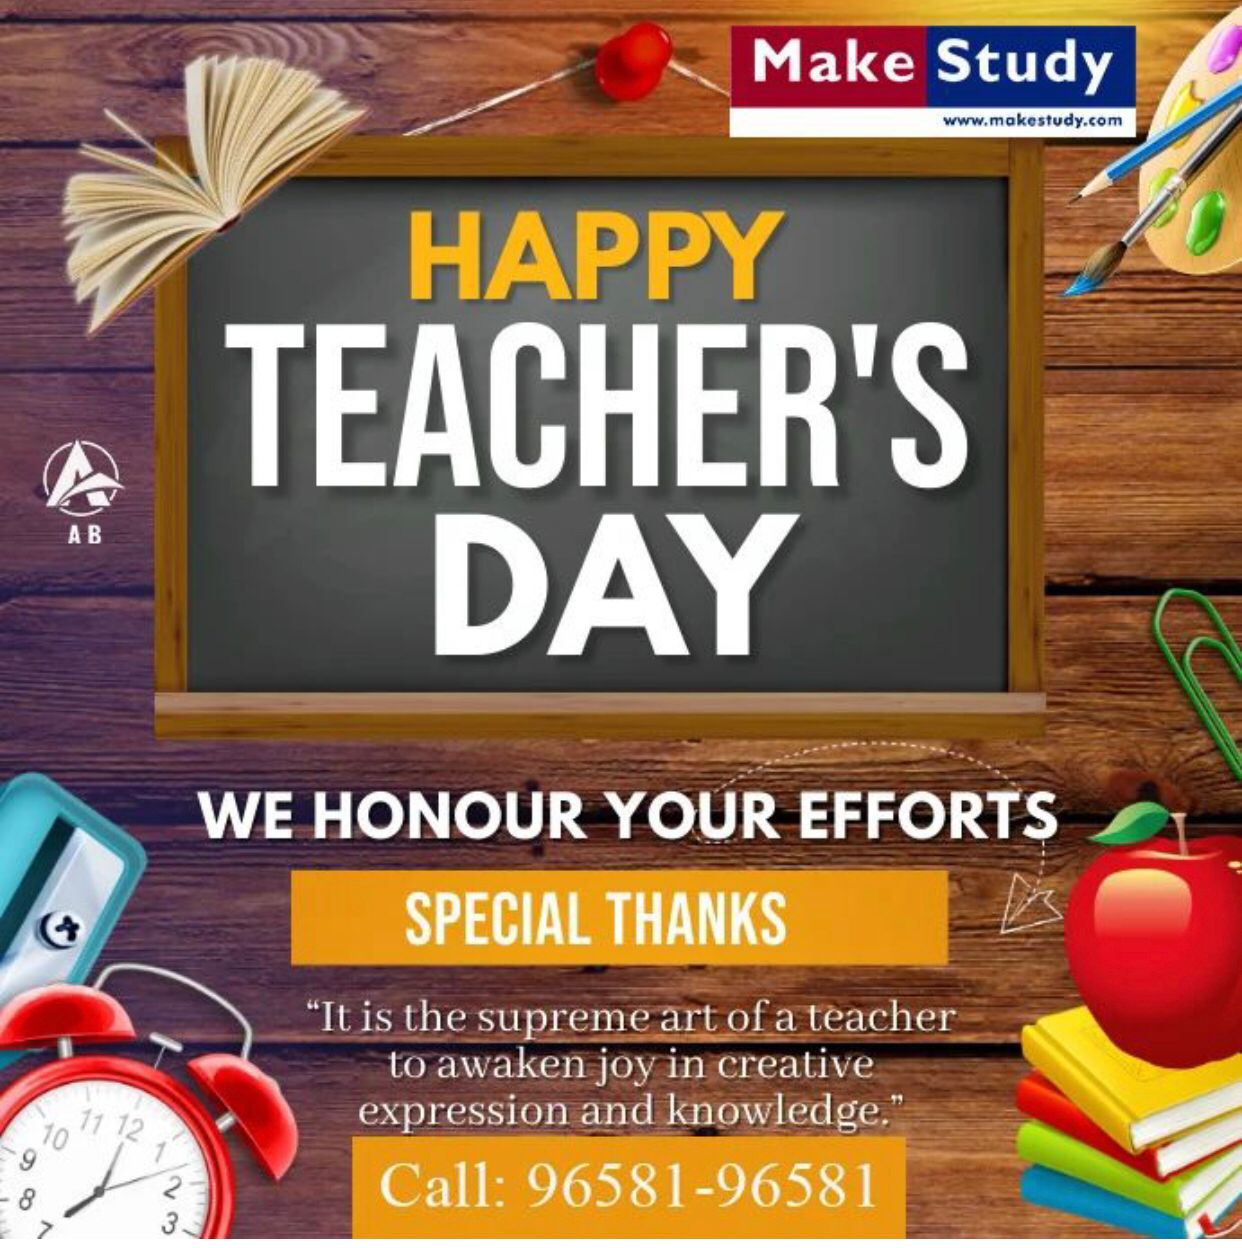 Happy Teachers Day From MakeStudy!!!